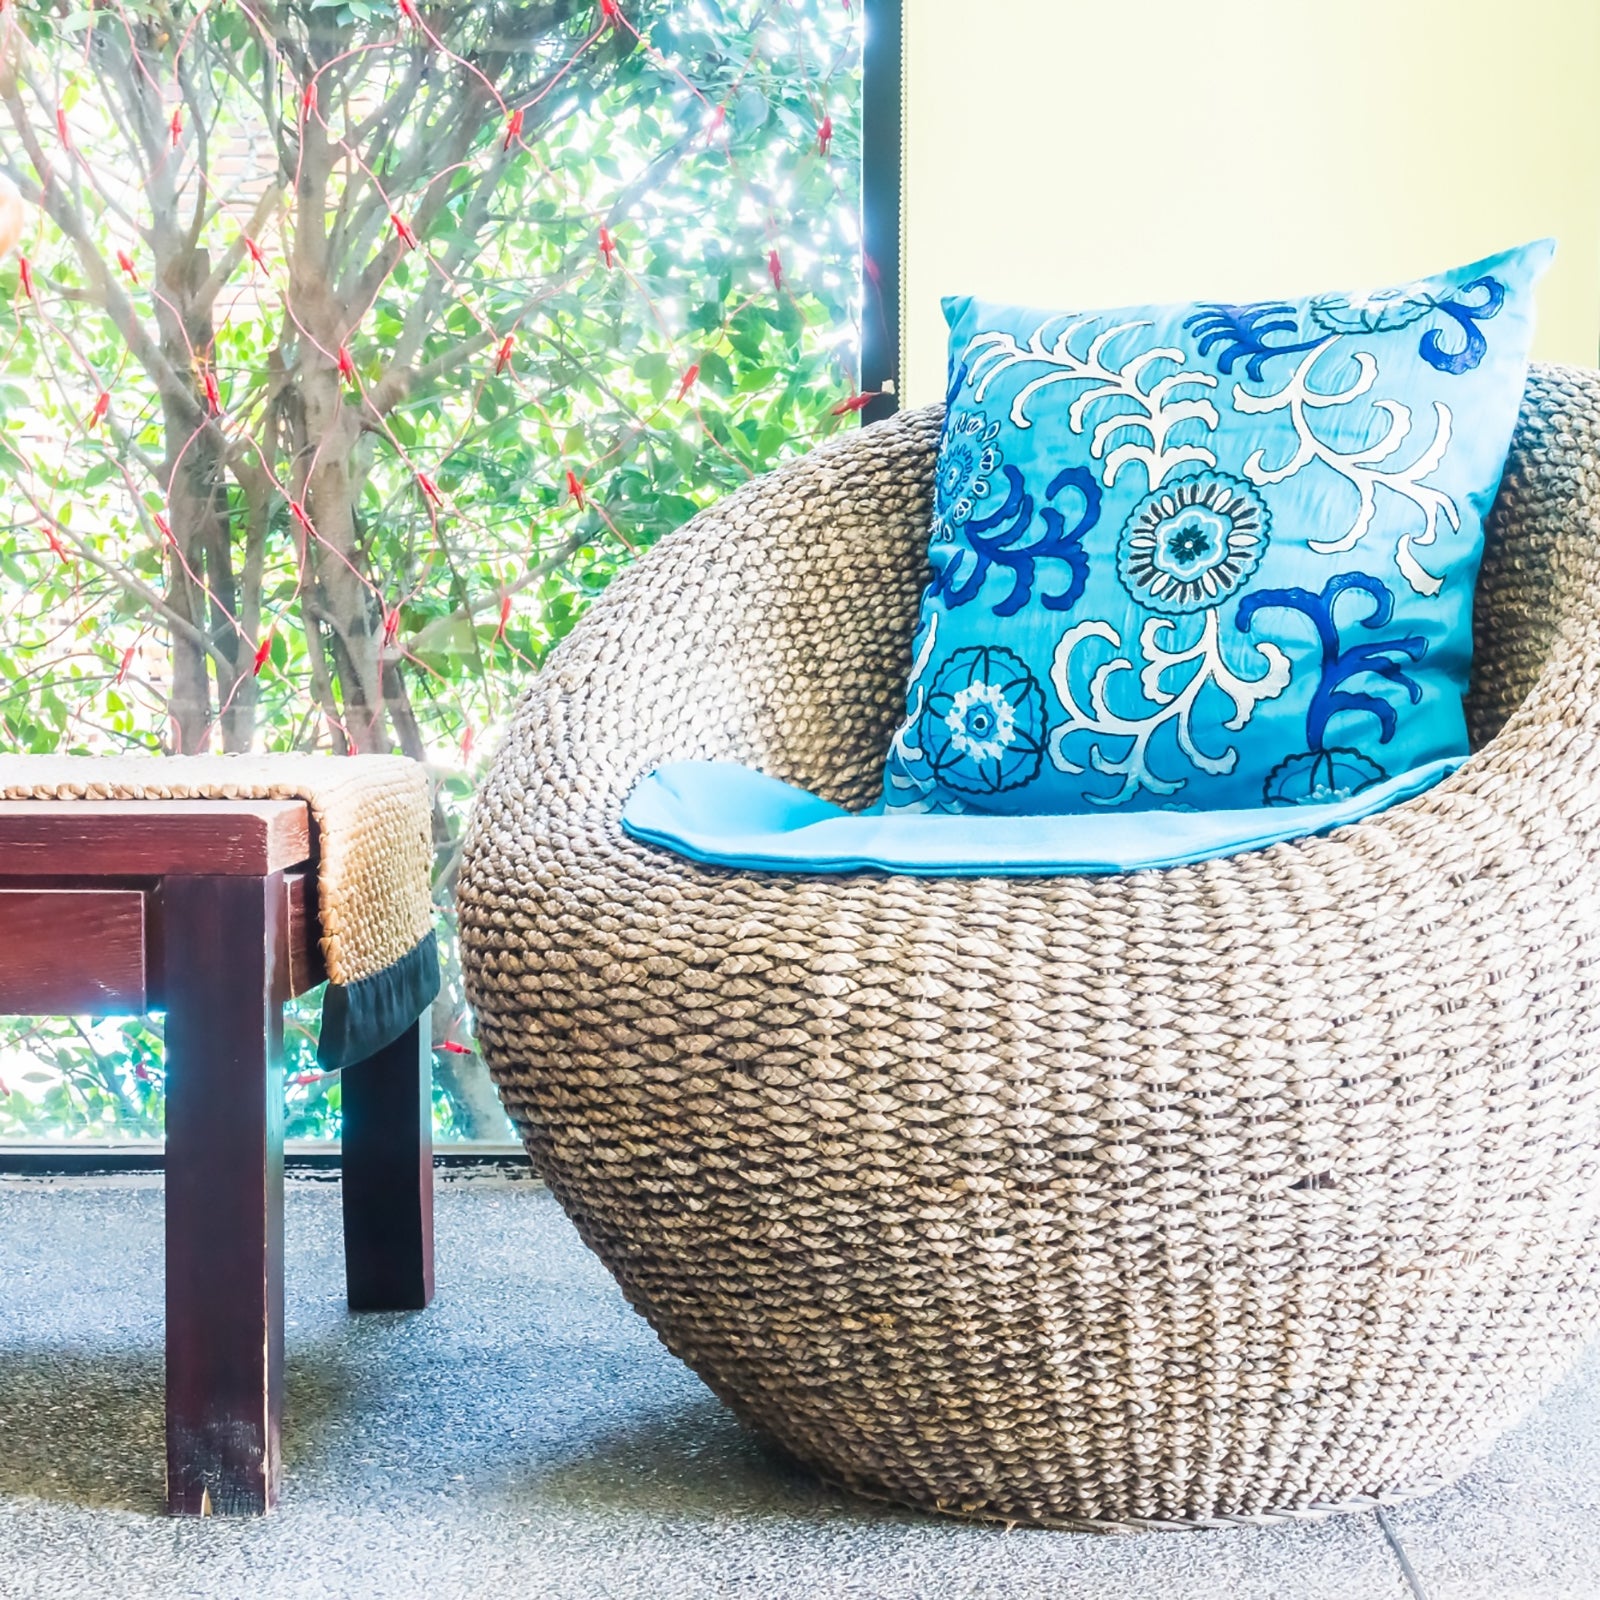 How To Maintain Your Outdoor Rattan Wicker Furniture - Tangkula